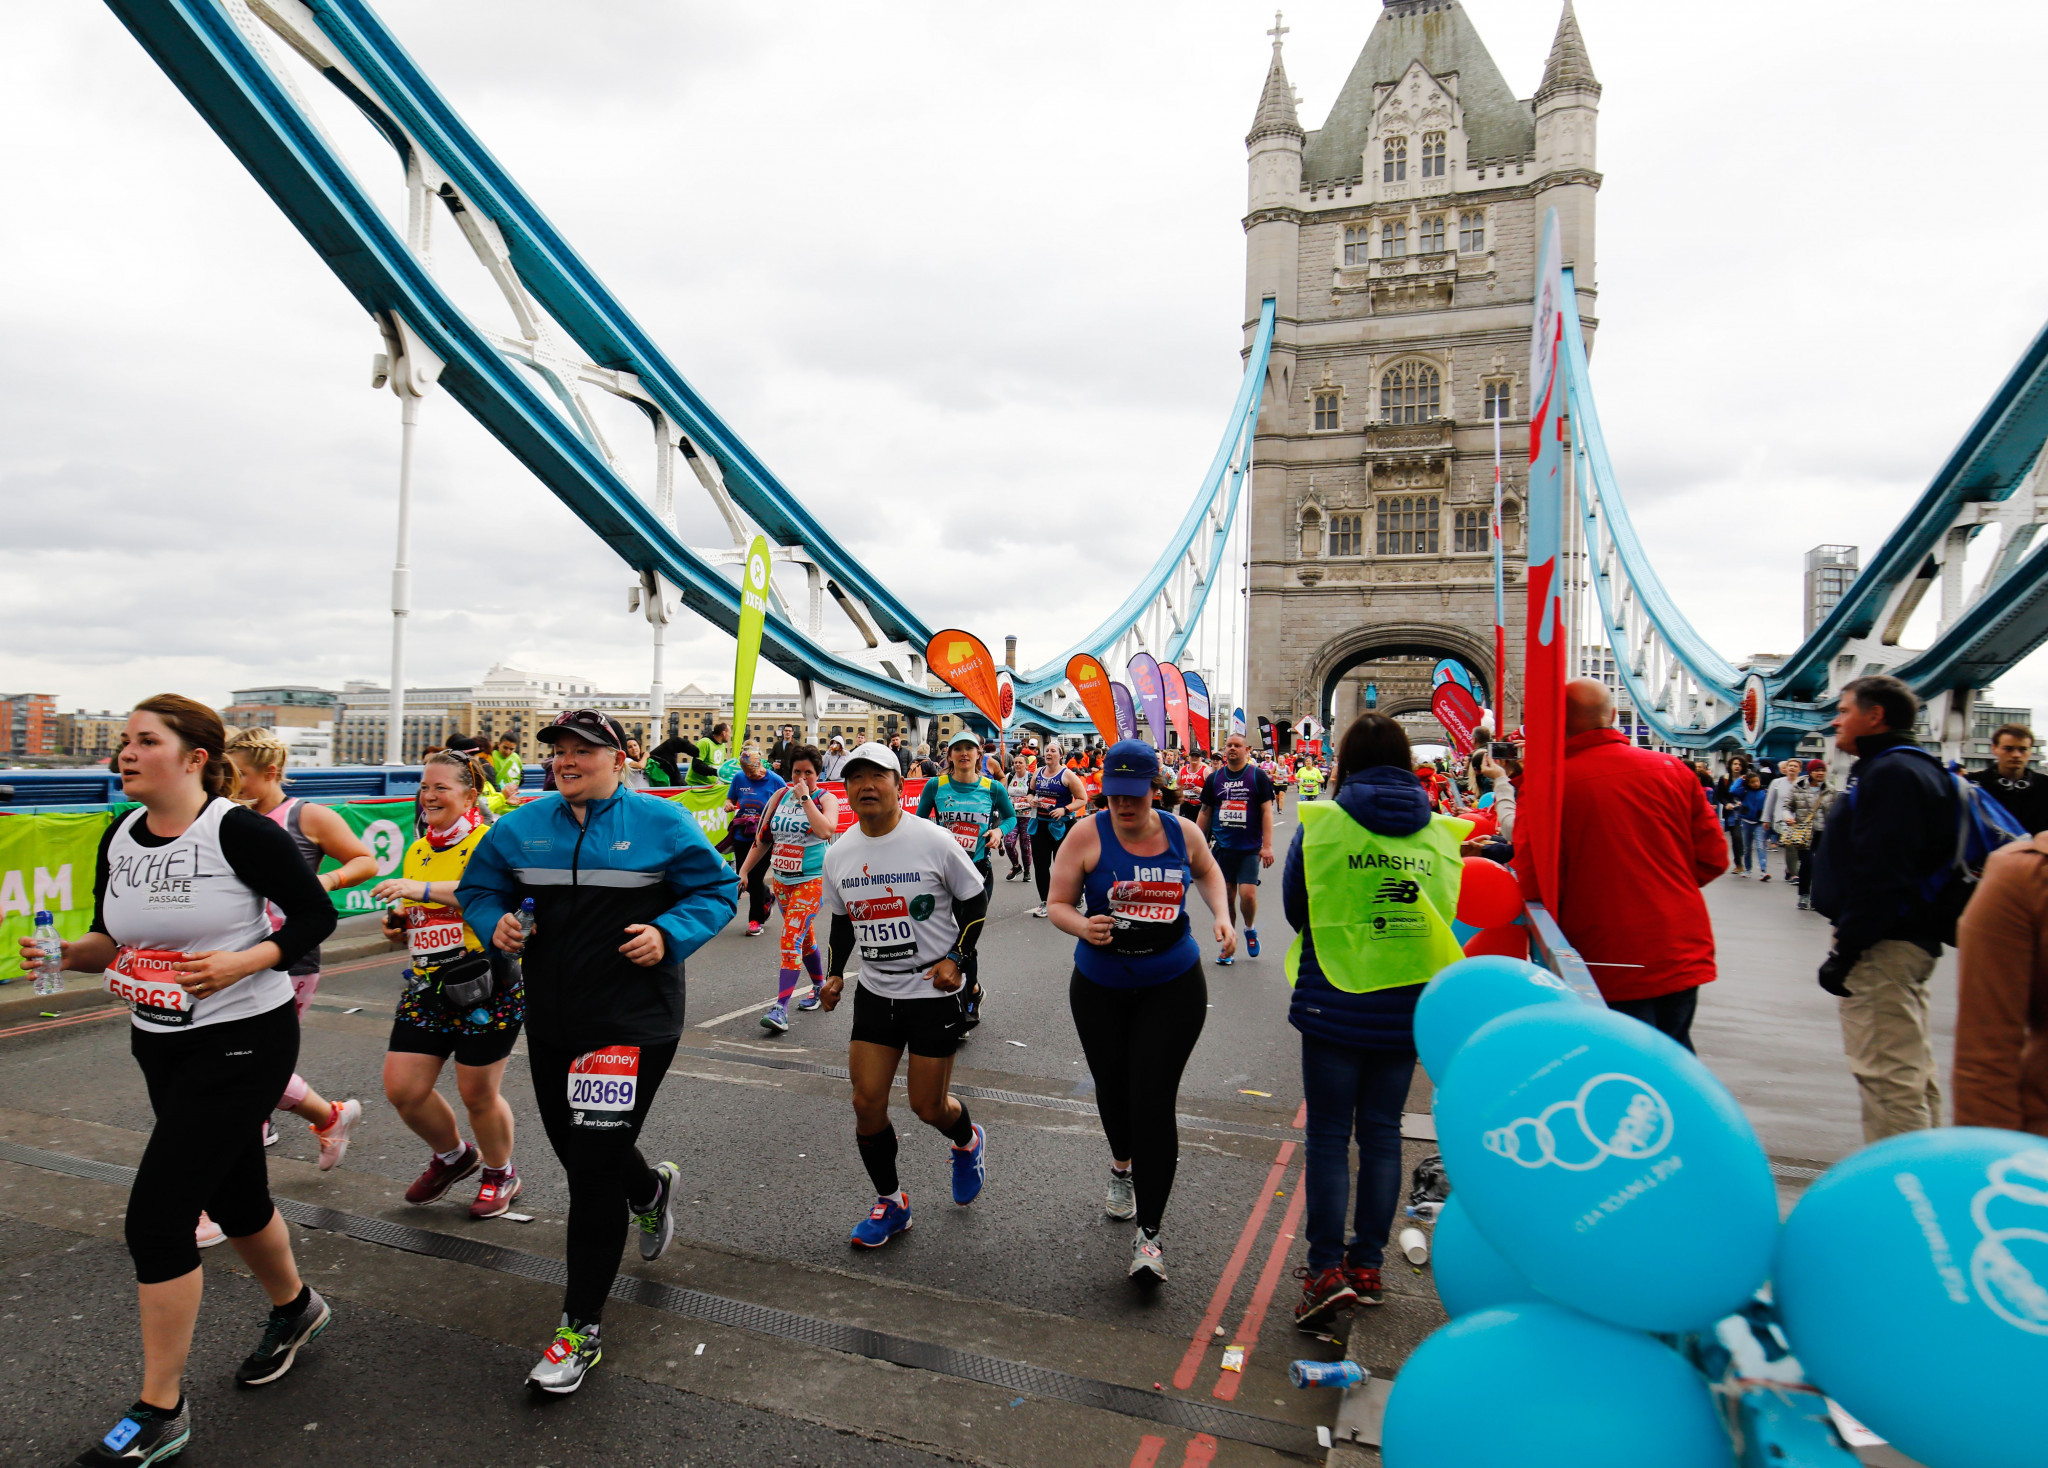 Thousands of runners tackled the course as part of the mass participation event ©Getty Images